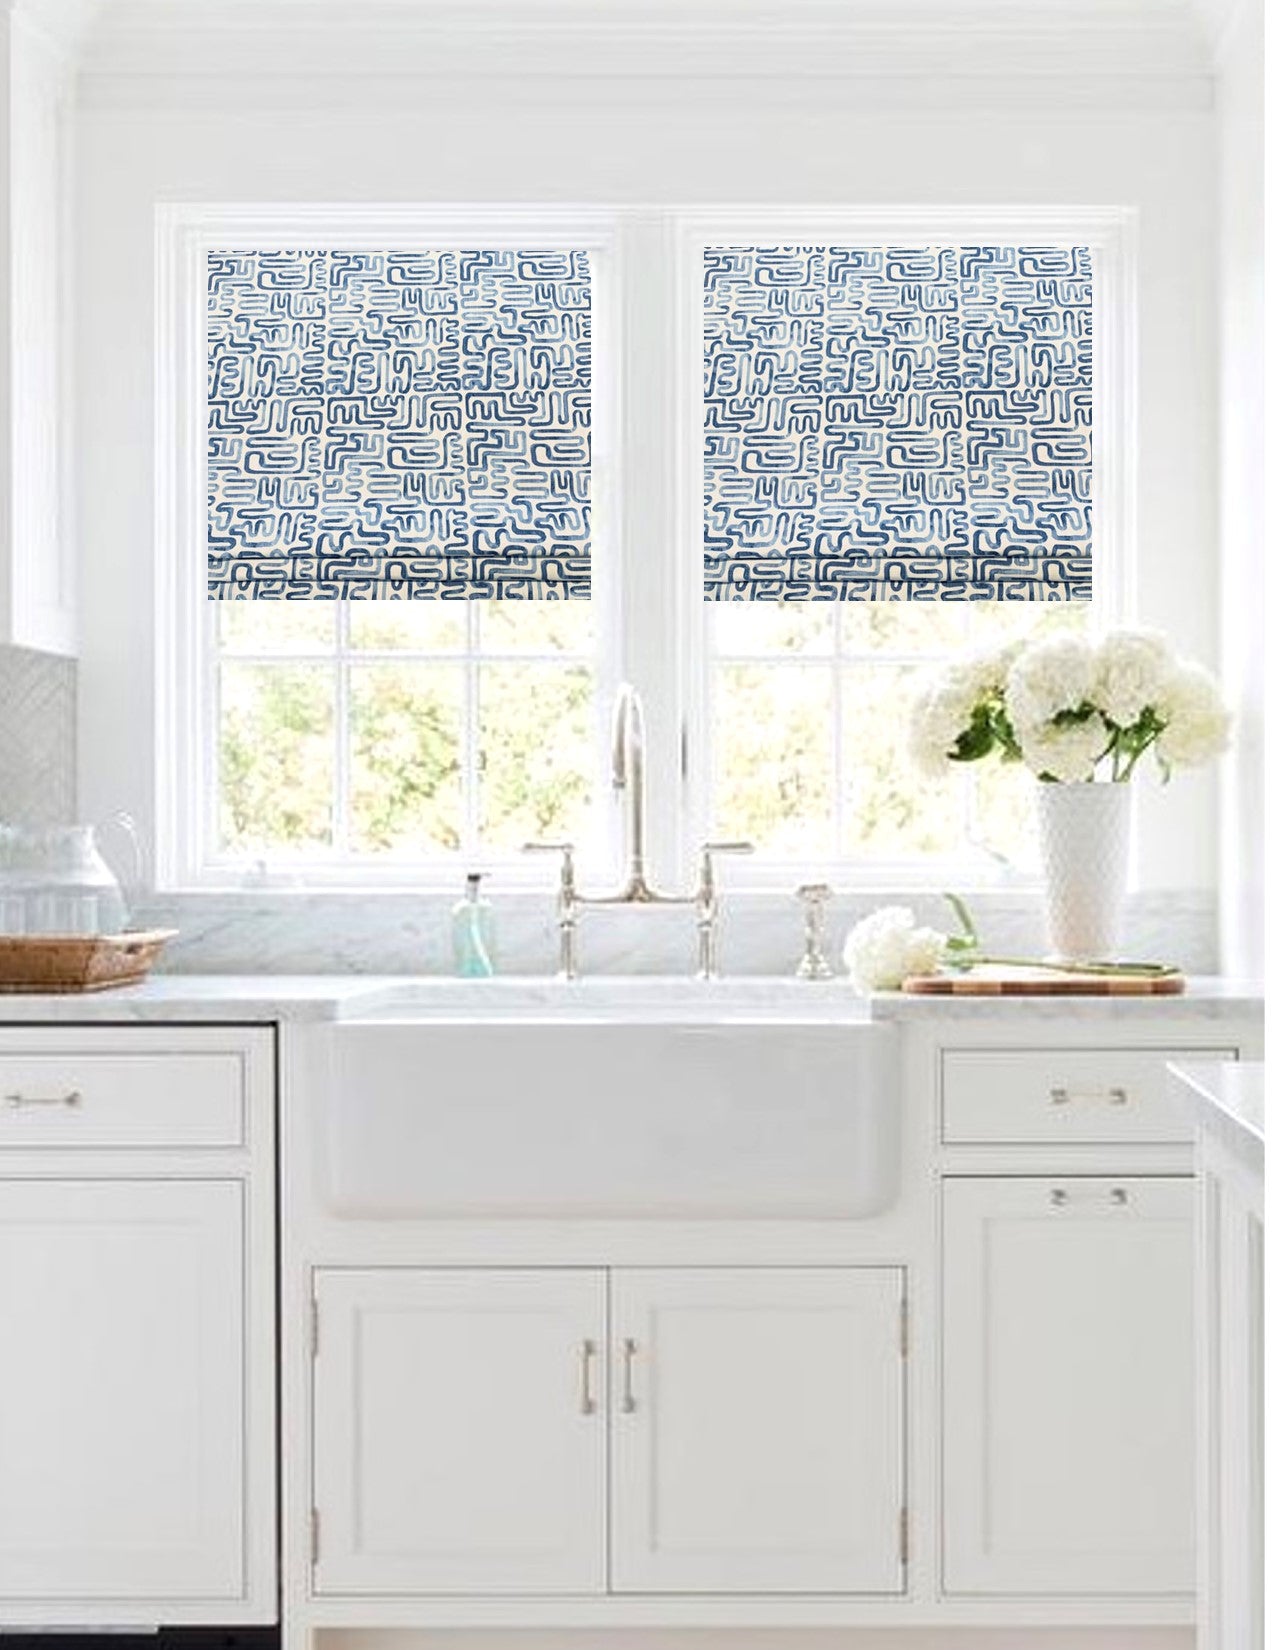 Custom Made Faux Roman Shade Valance in Indigo Blue 100% Cotton Luxe Canvas, Fully Lined, More colors available including Grey and Tan